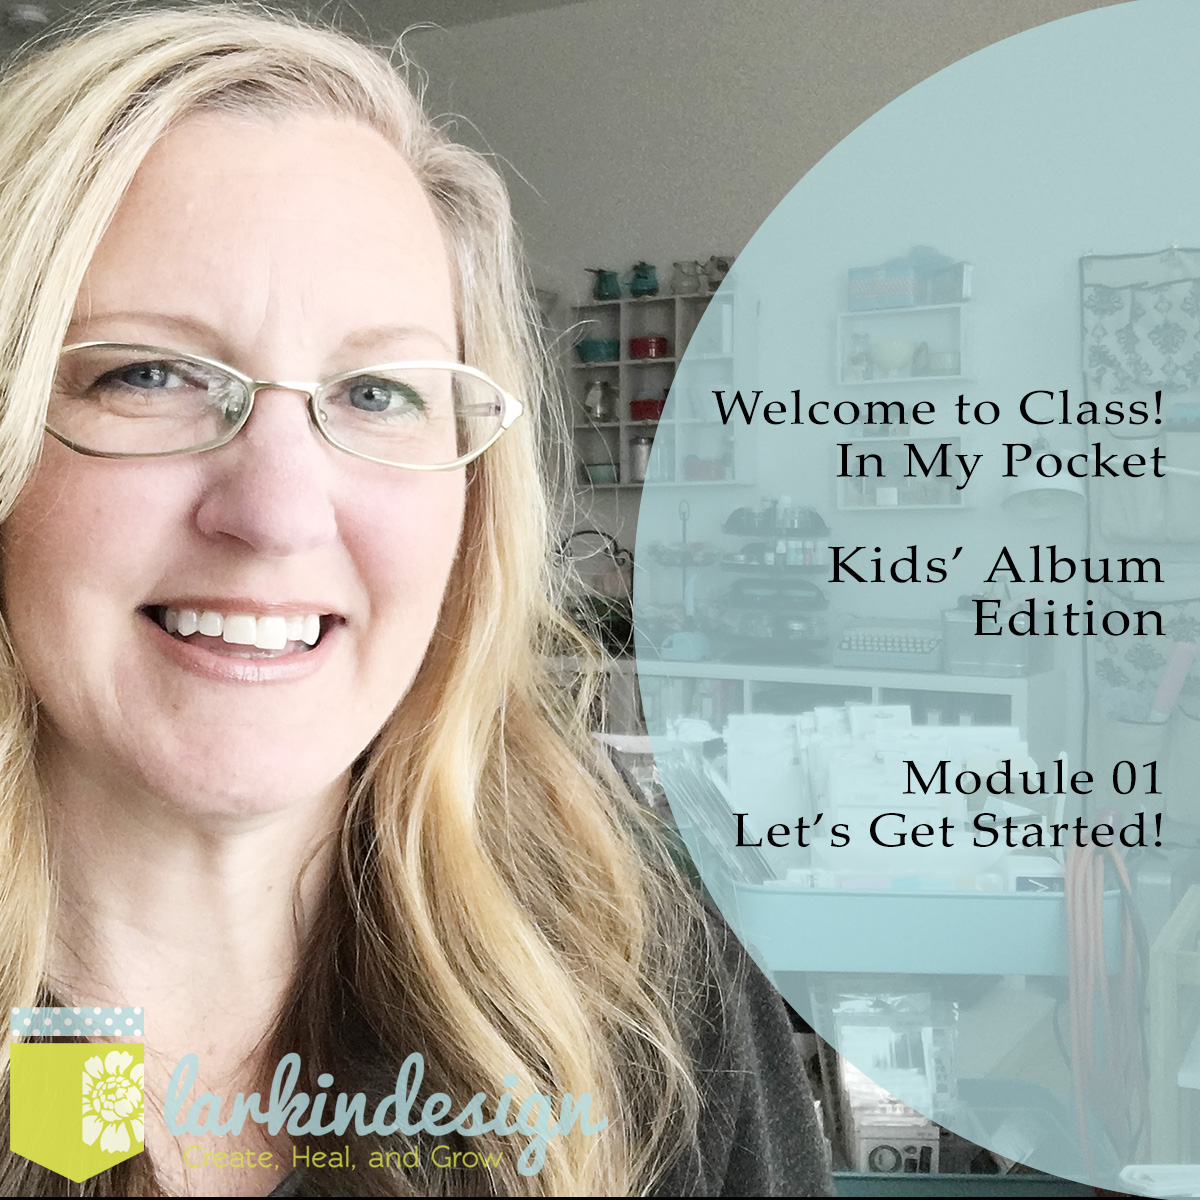 Larkindesign In My Pocket Kids Album Edition Introduction to the Class